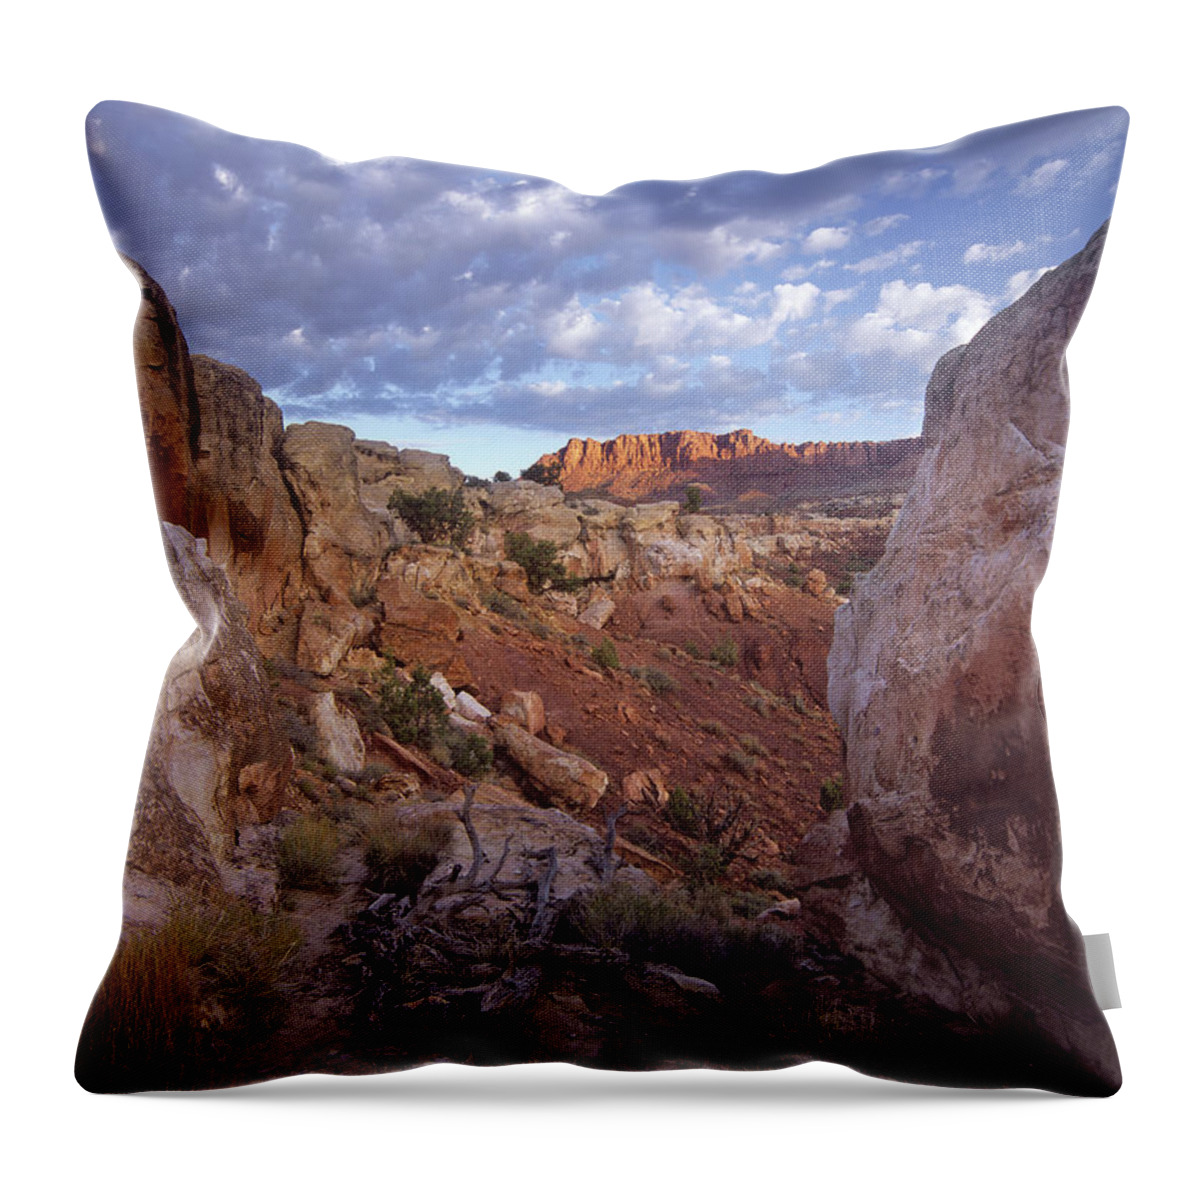 00177097 Throw Pillow featuring the photograph Meeks Mesa Capitol Reef National Park by Tim Fitzharris